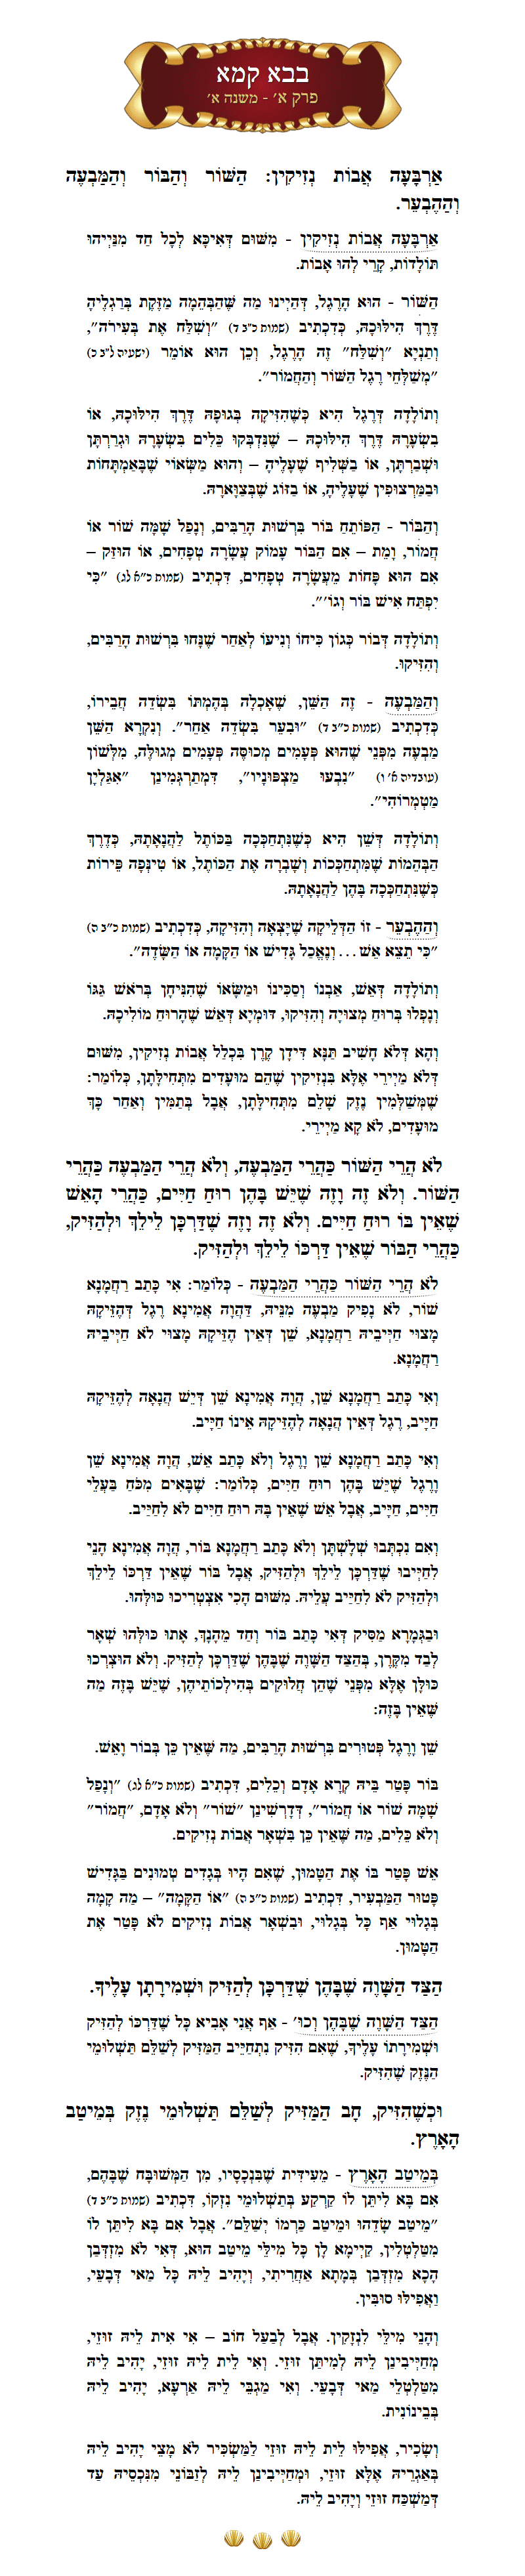 Masechta Bava Kamma Chapter 1 Mishnah 1 with commentary